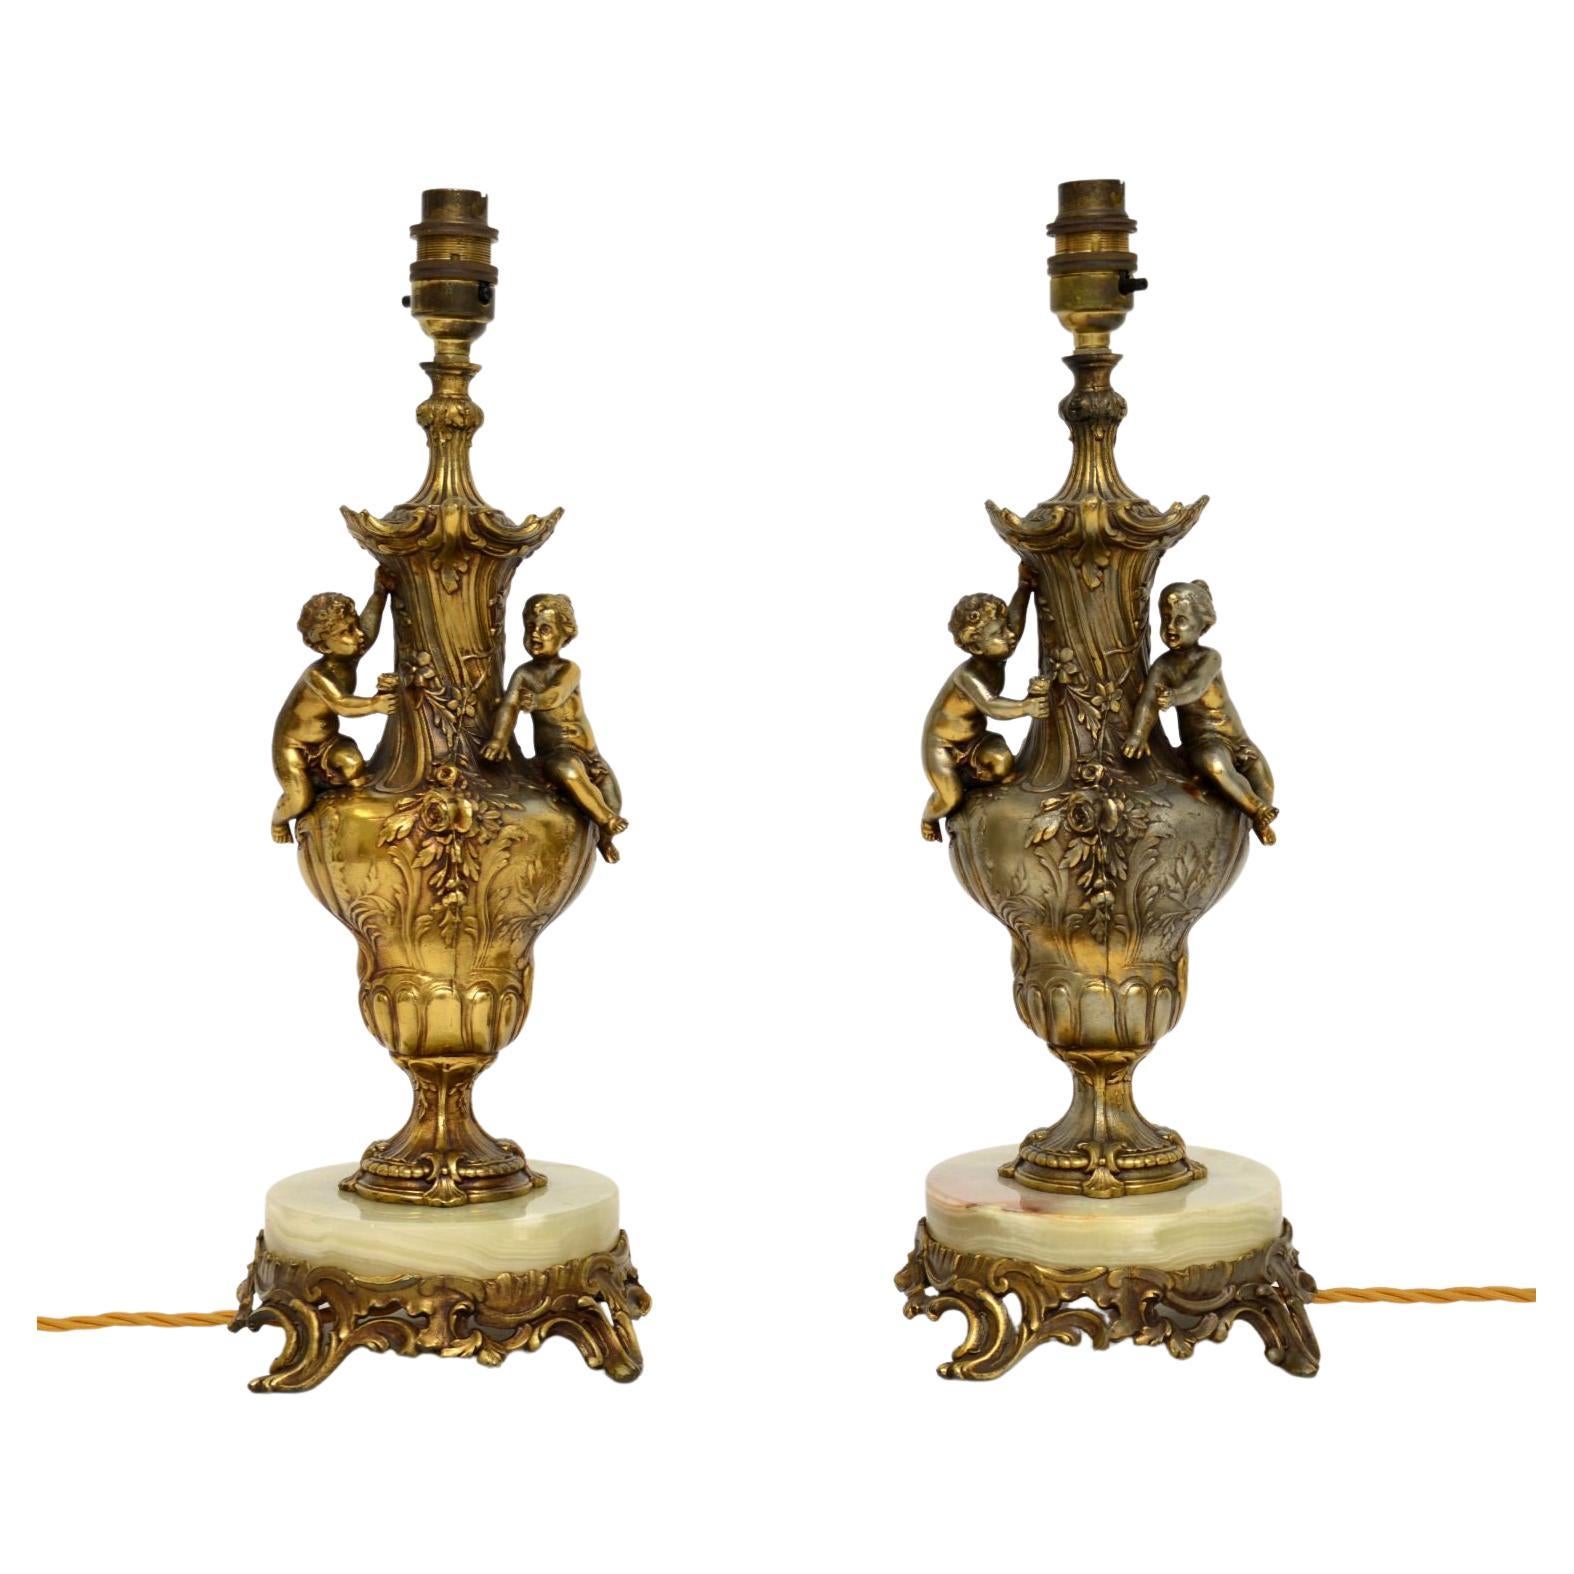 Pair of Antique French Gilt Metal Table Lamps